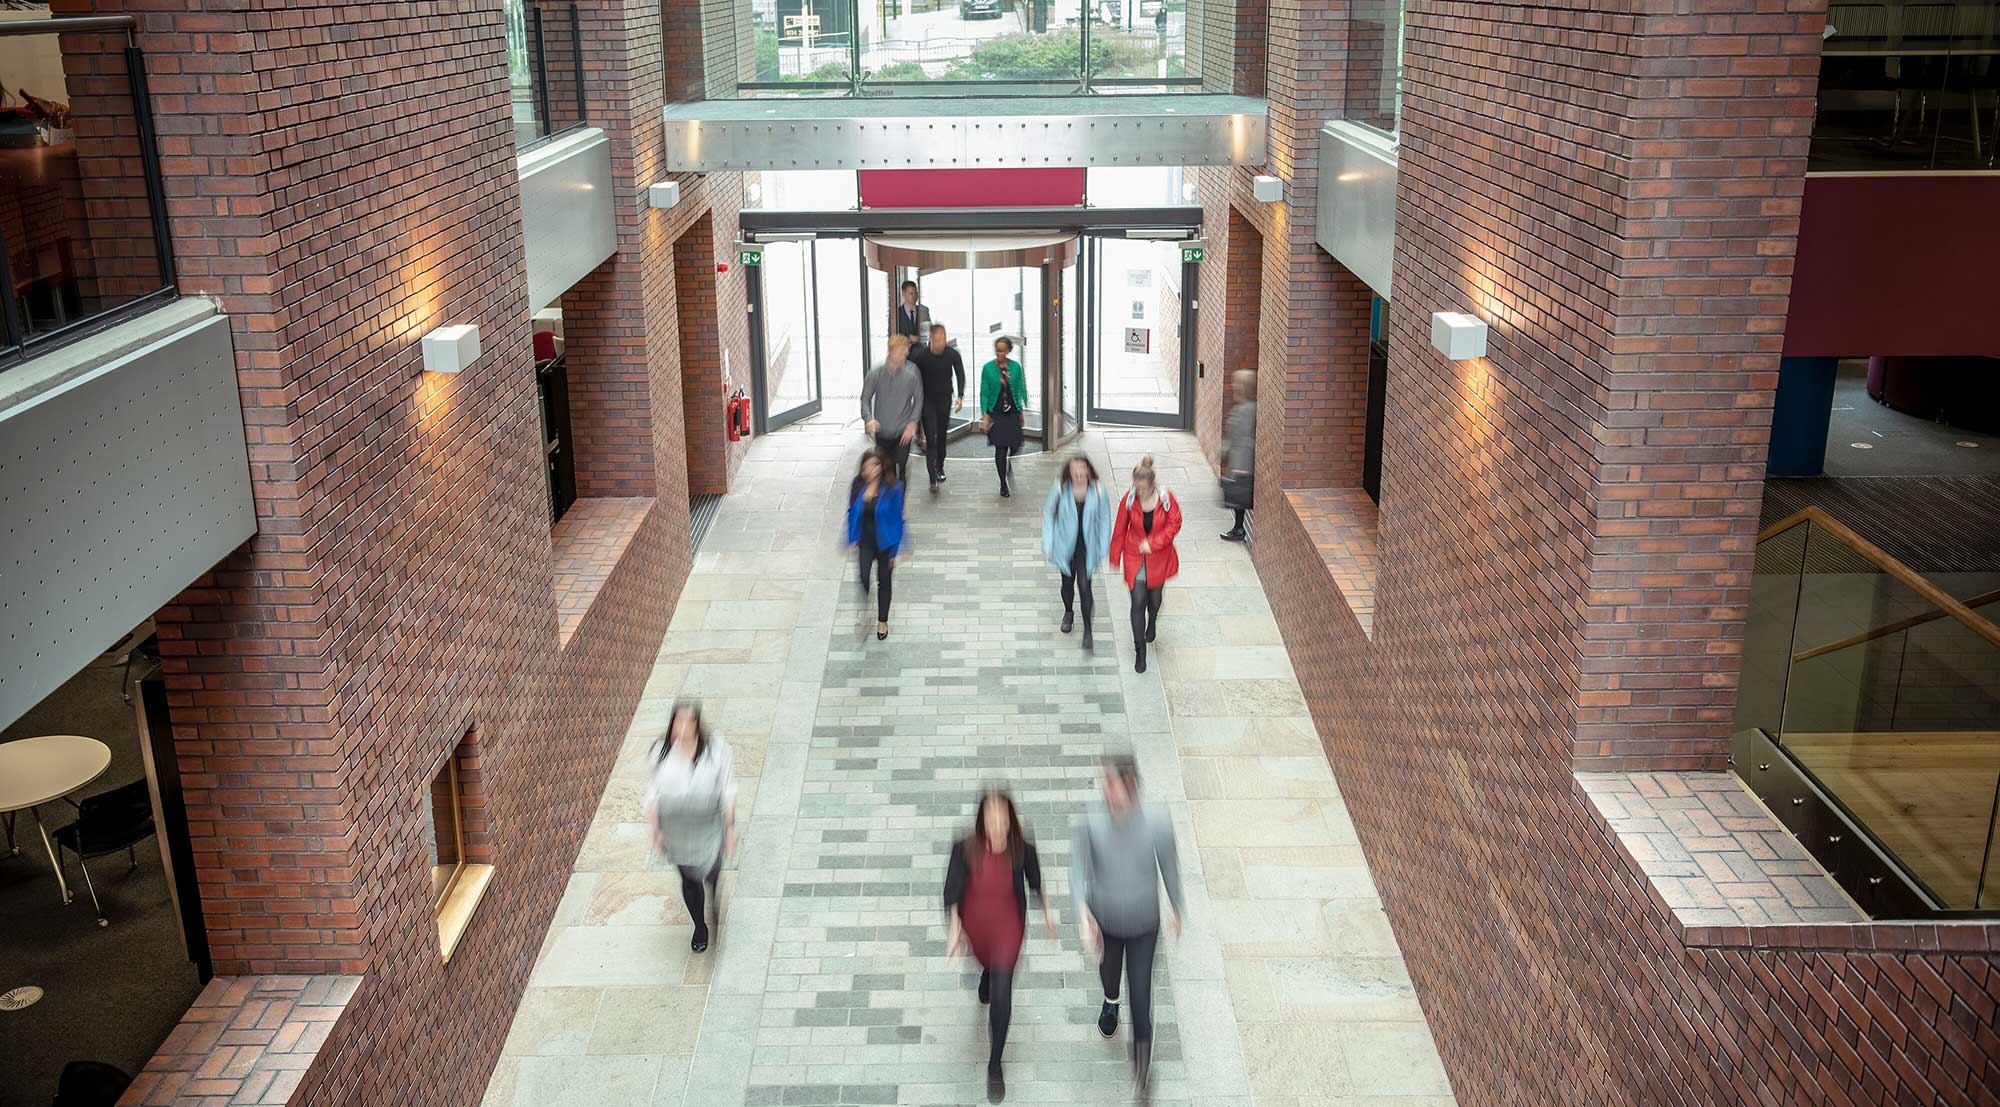 Several people seen from above walking through the central atrium of the Charles St building